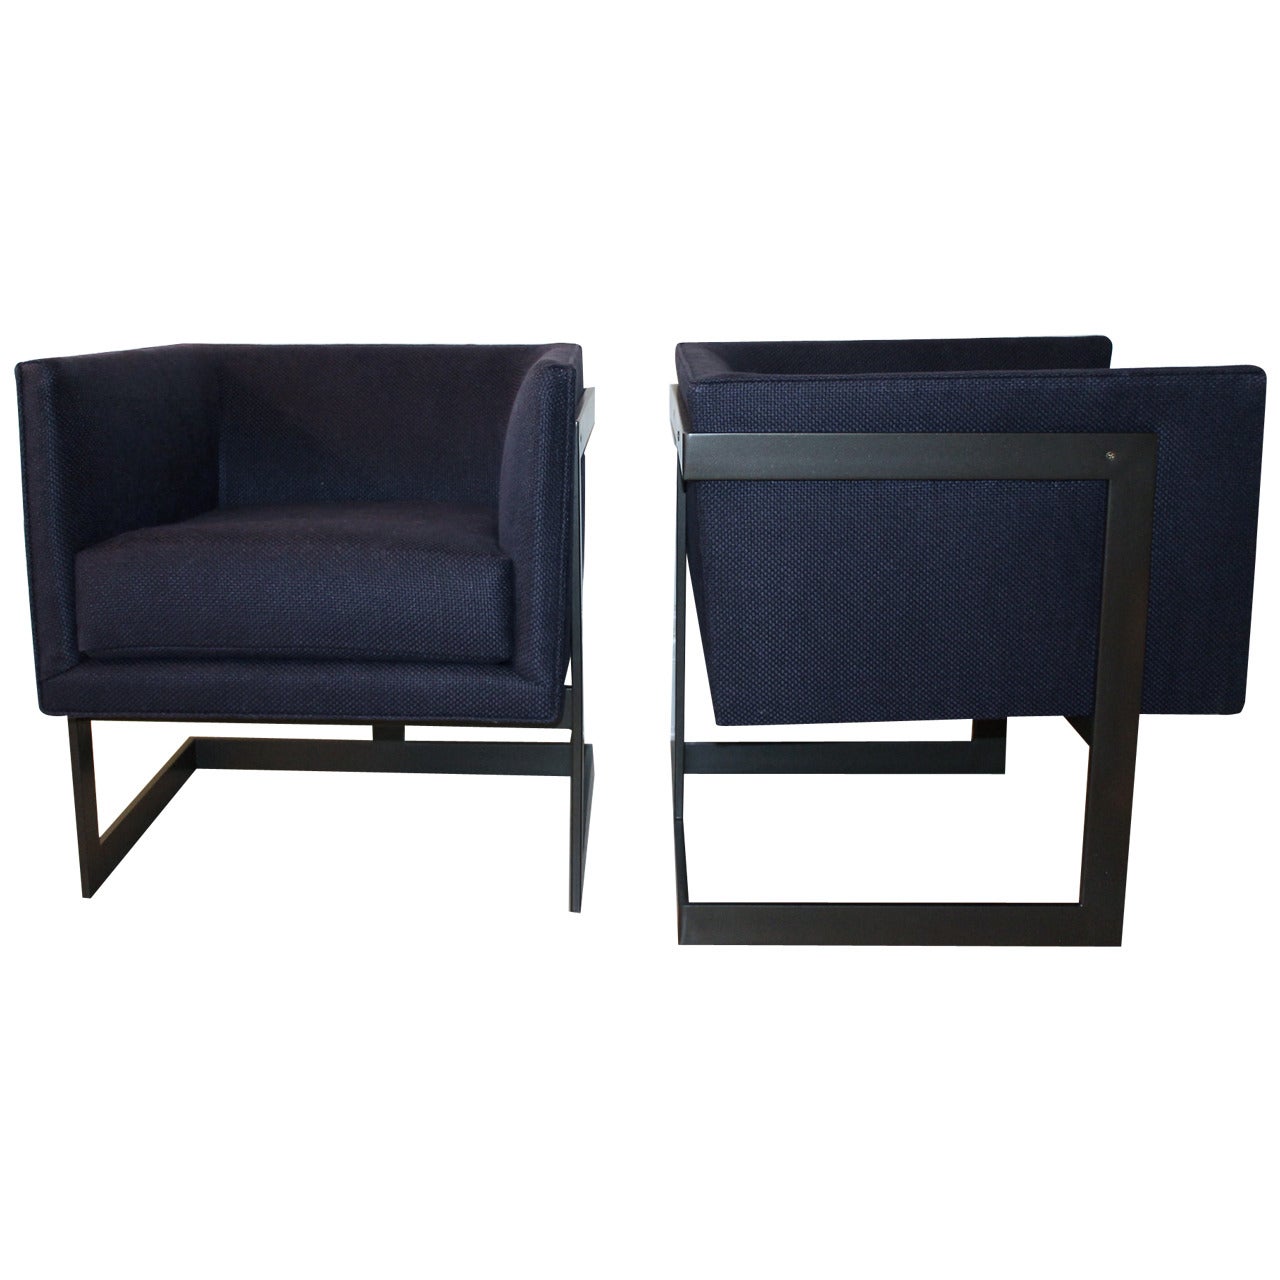 Pair of Milo Baughman "Cube" Chairs For Sale